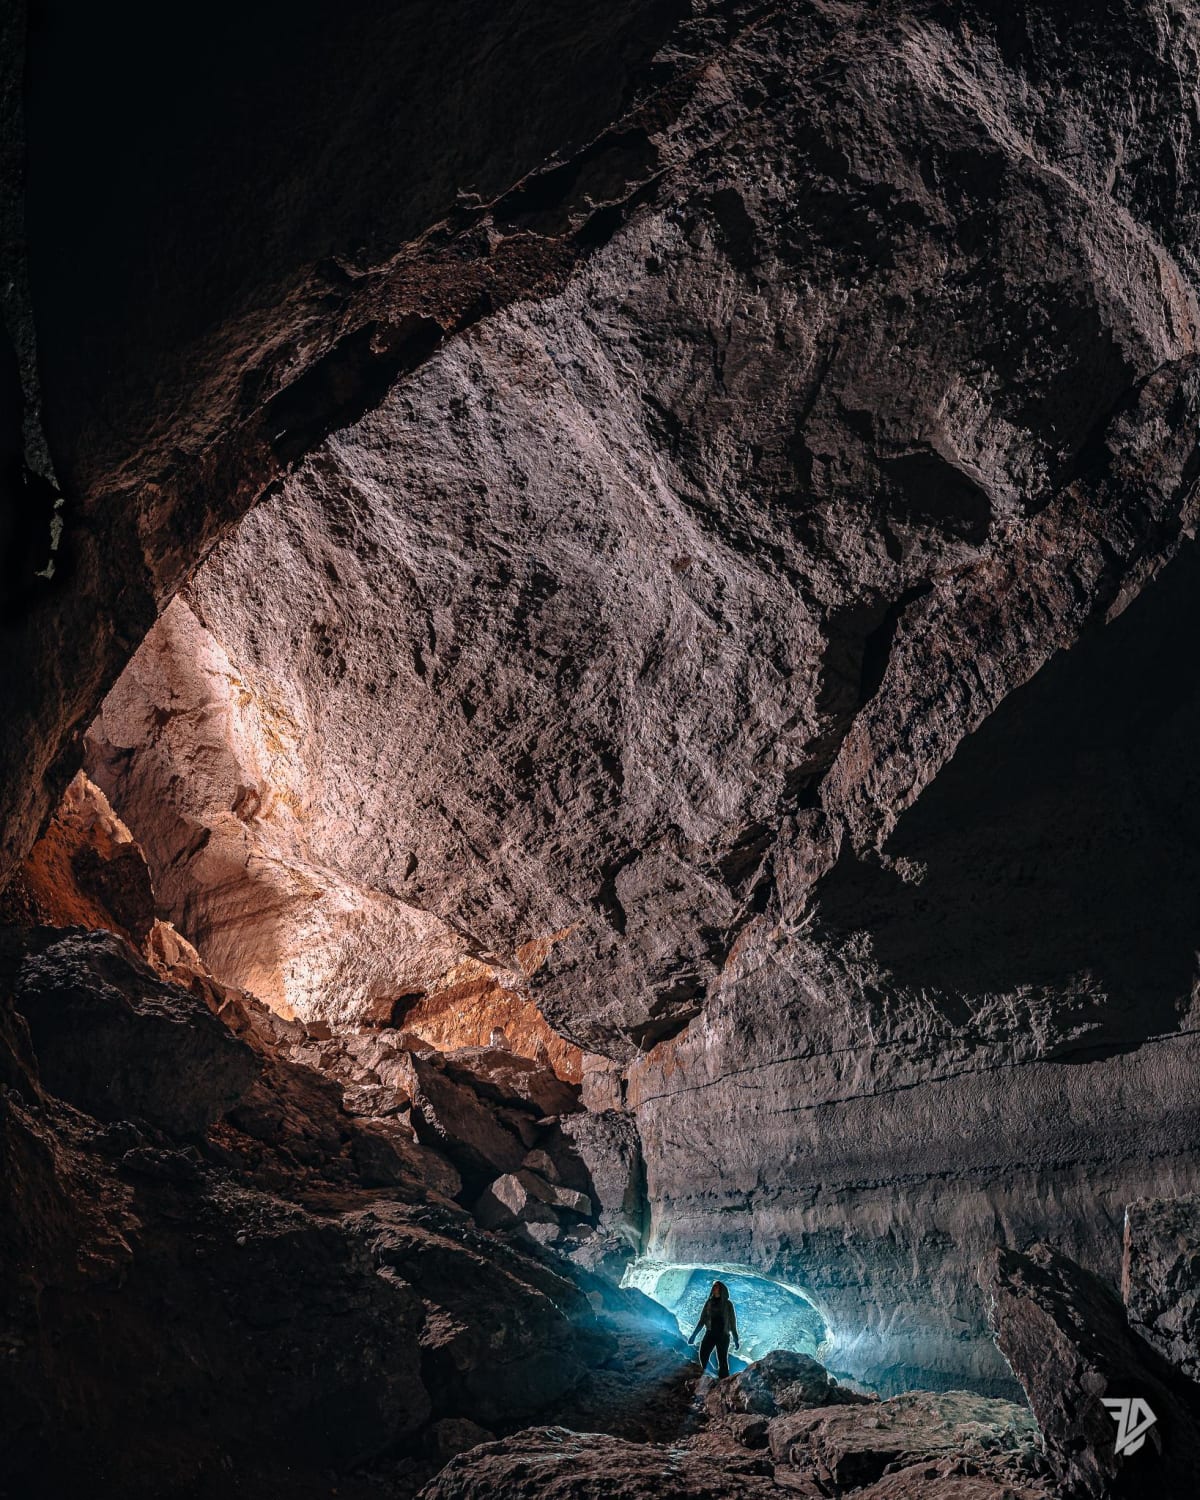 20s exposure in this huge cave